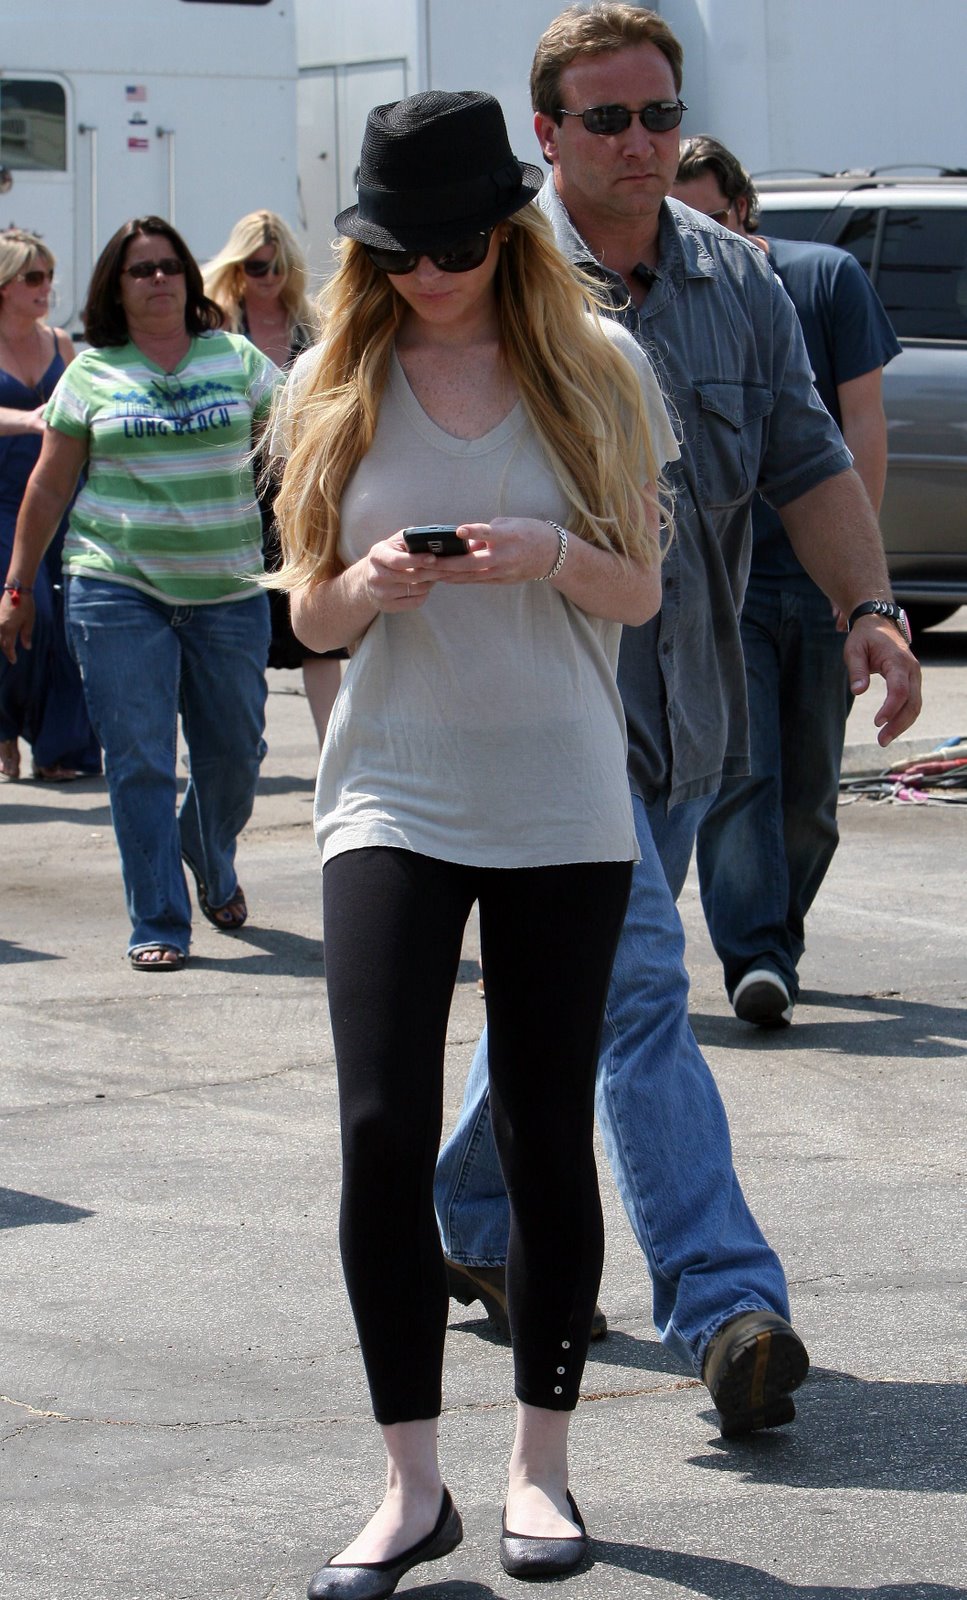 [77354_tlfan_Lindsay_Lohan_performs_her_final_scenes_on_the_set_of_Labor_Pains_7.16.08_22_122_1010lo.jpg]